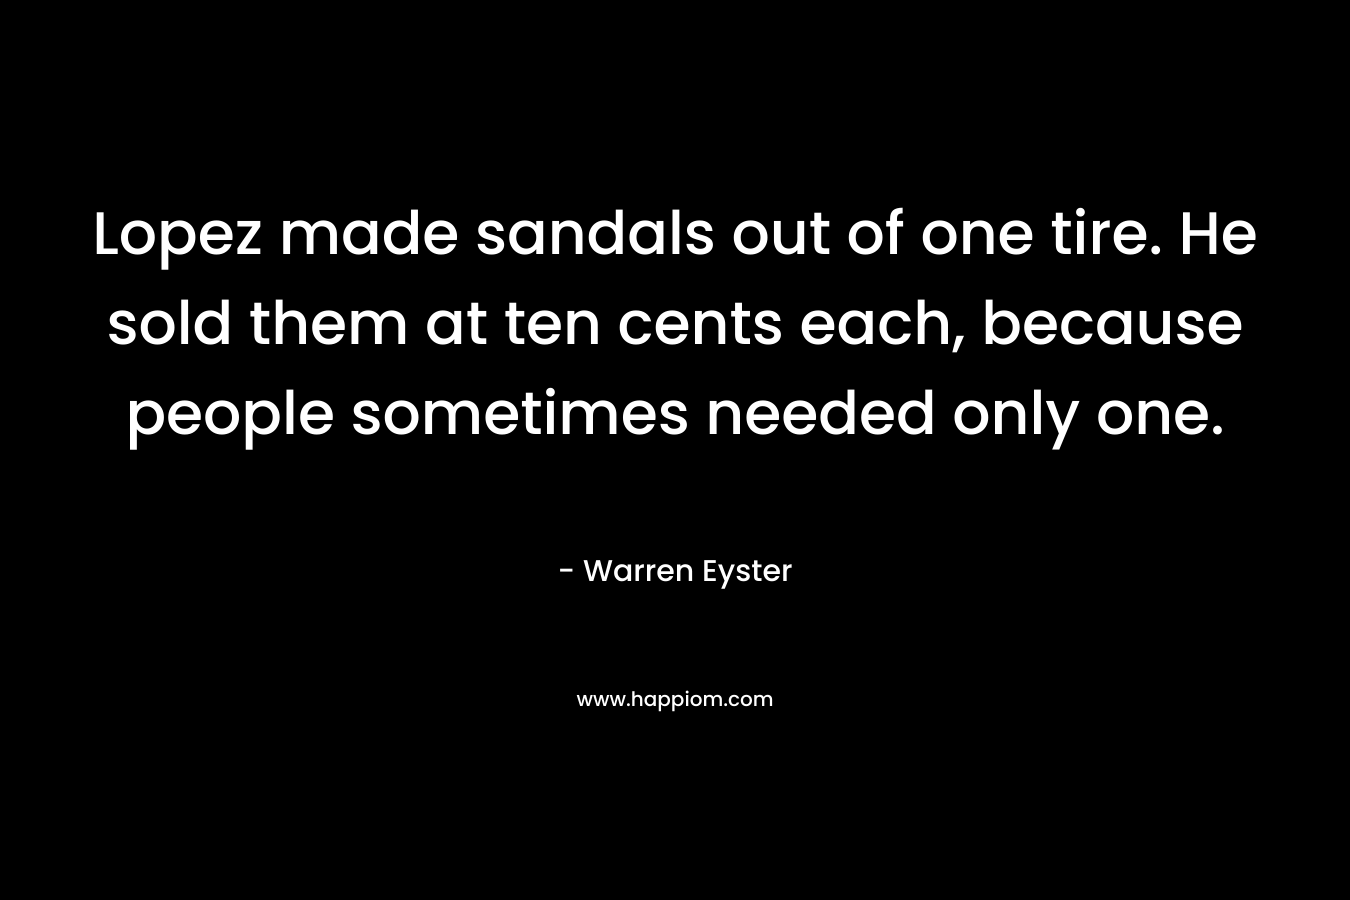 Lopez made sandals out of one tire. He sold them at ten cents each, because people sometimes needed only one. – Warren Eyster